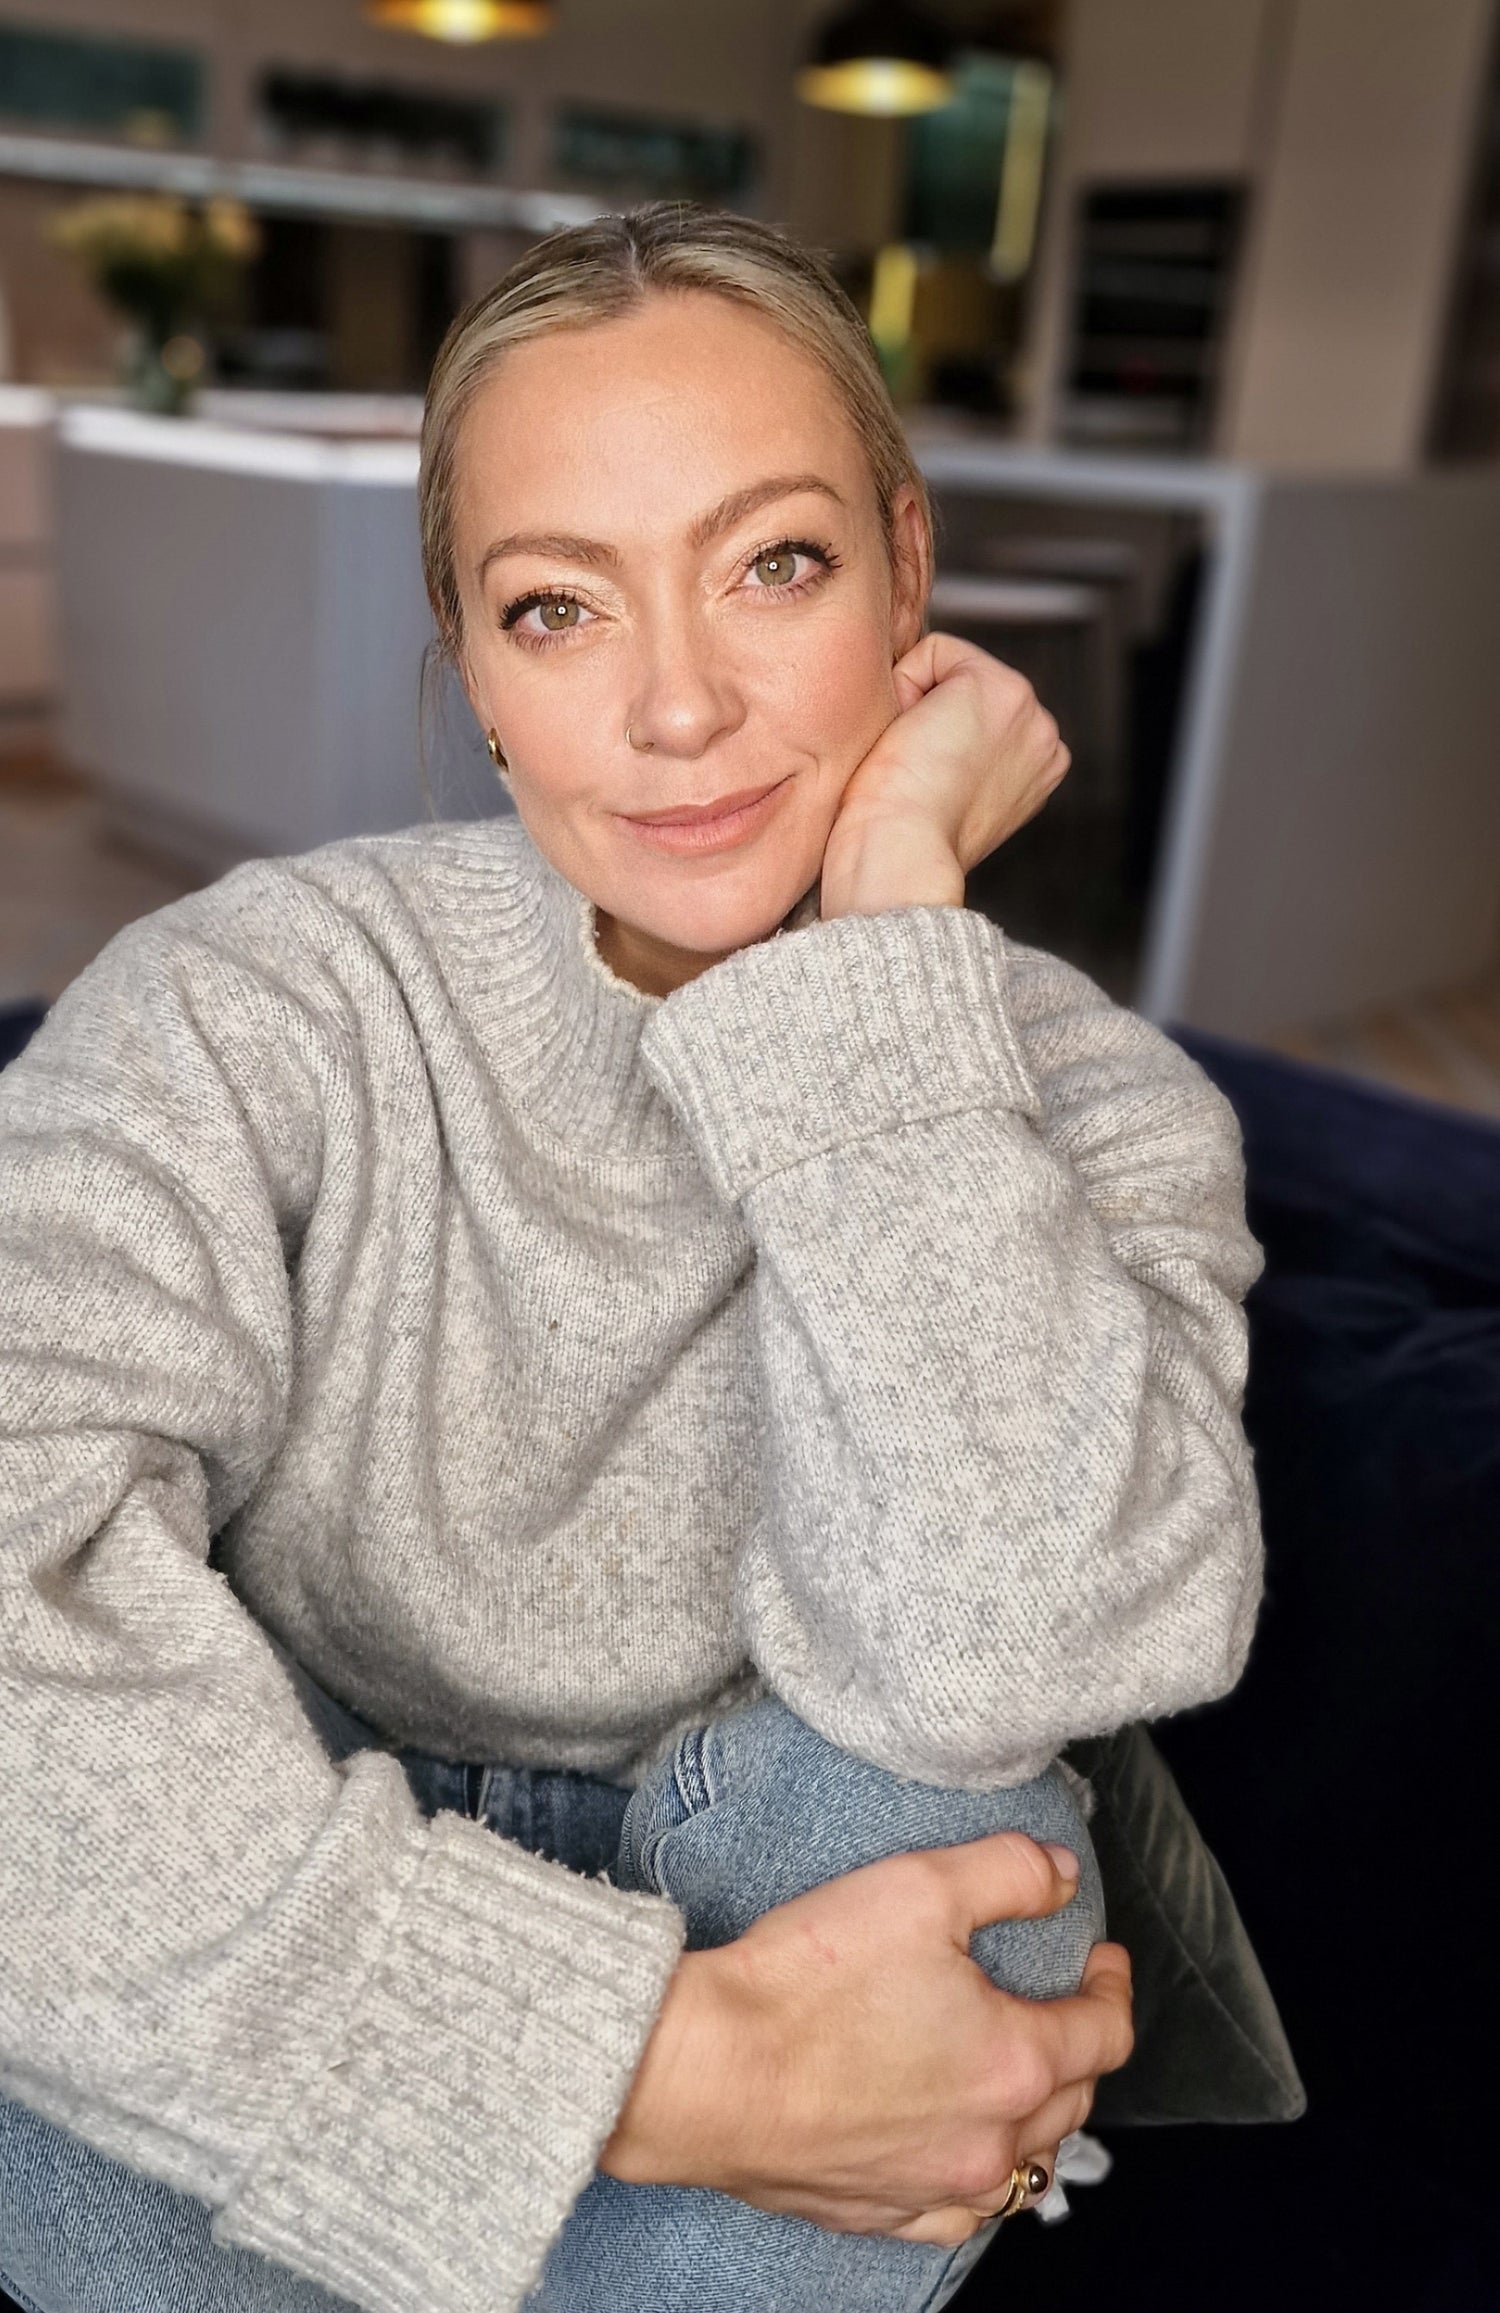 Woman smiling, sitting on sofa in grey jumper.